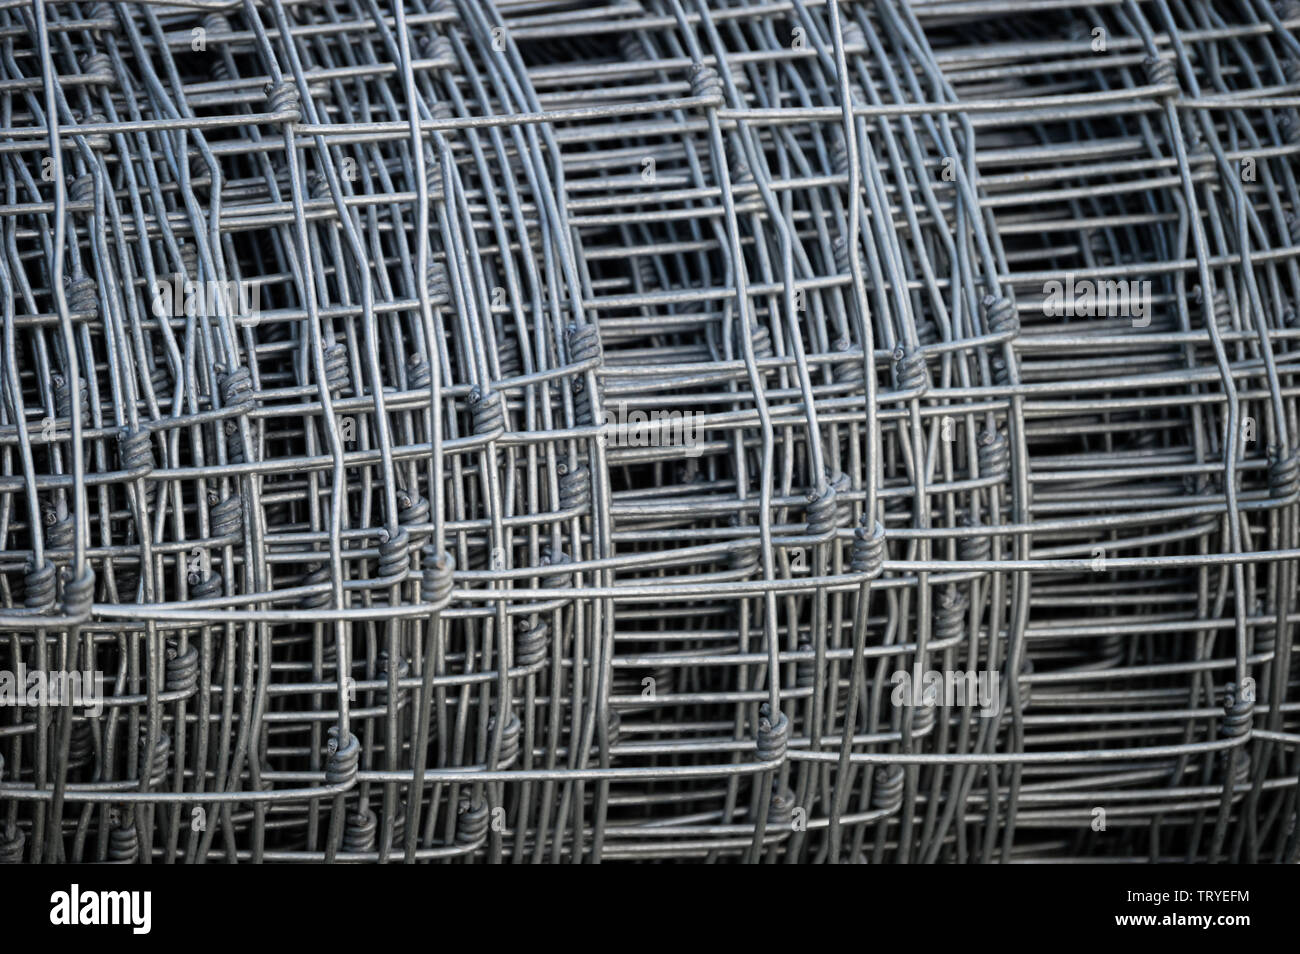 Closeup of a silver roll of galvanised steel metal sheep wire netting used for fencing livestock and crops Stock Photo